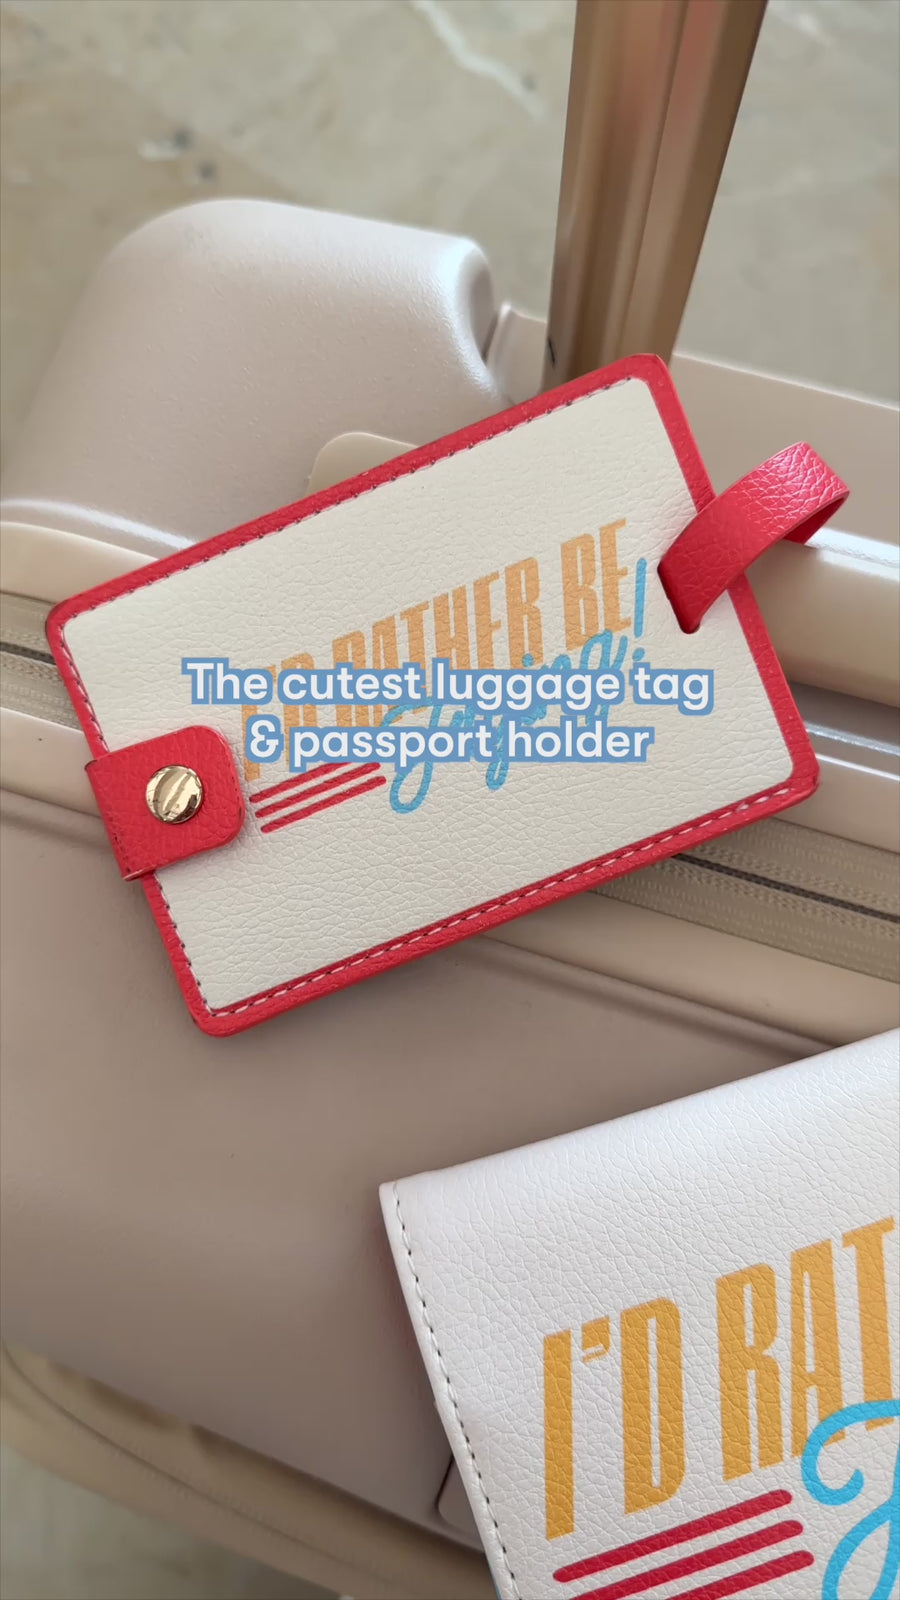 model using i'd rather be flying luggage tag and passport holder at the airport